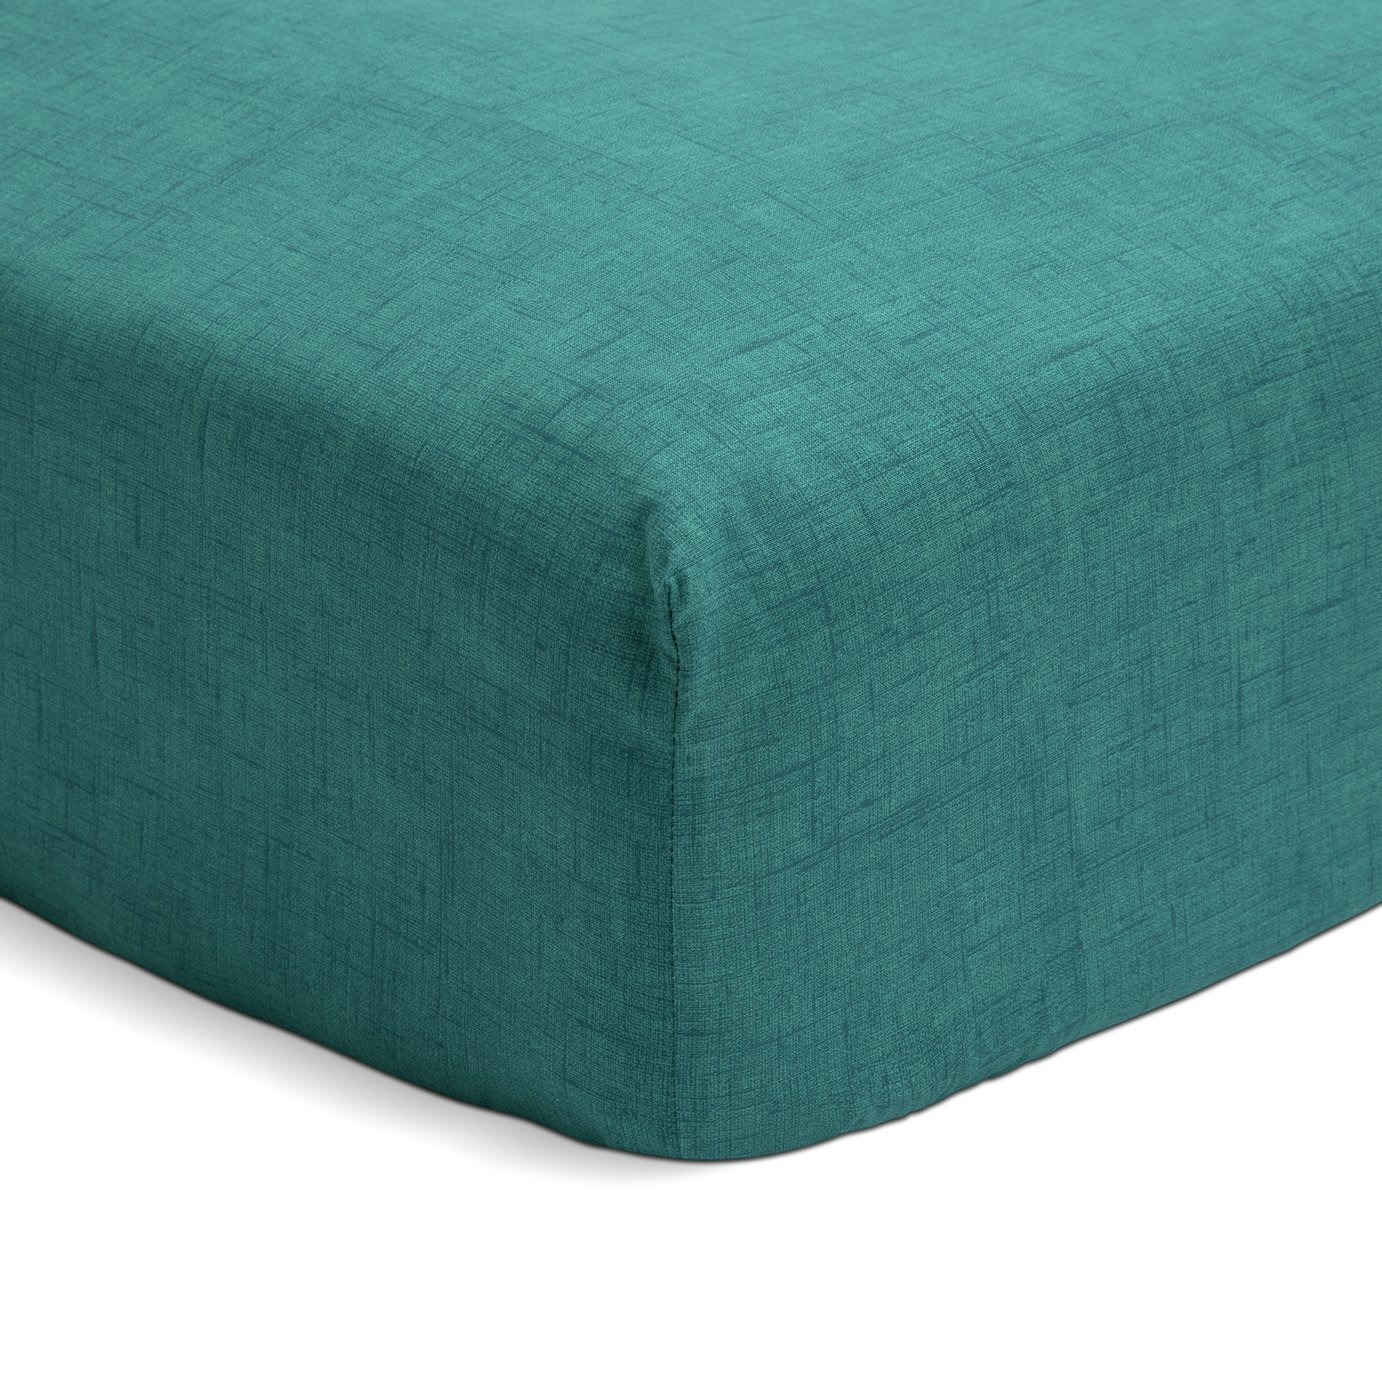 Habitat Texture Printed Teal Fitted Sheet - King size - image 1